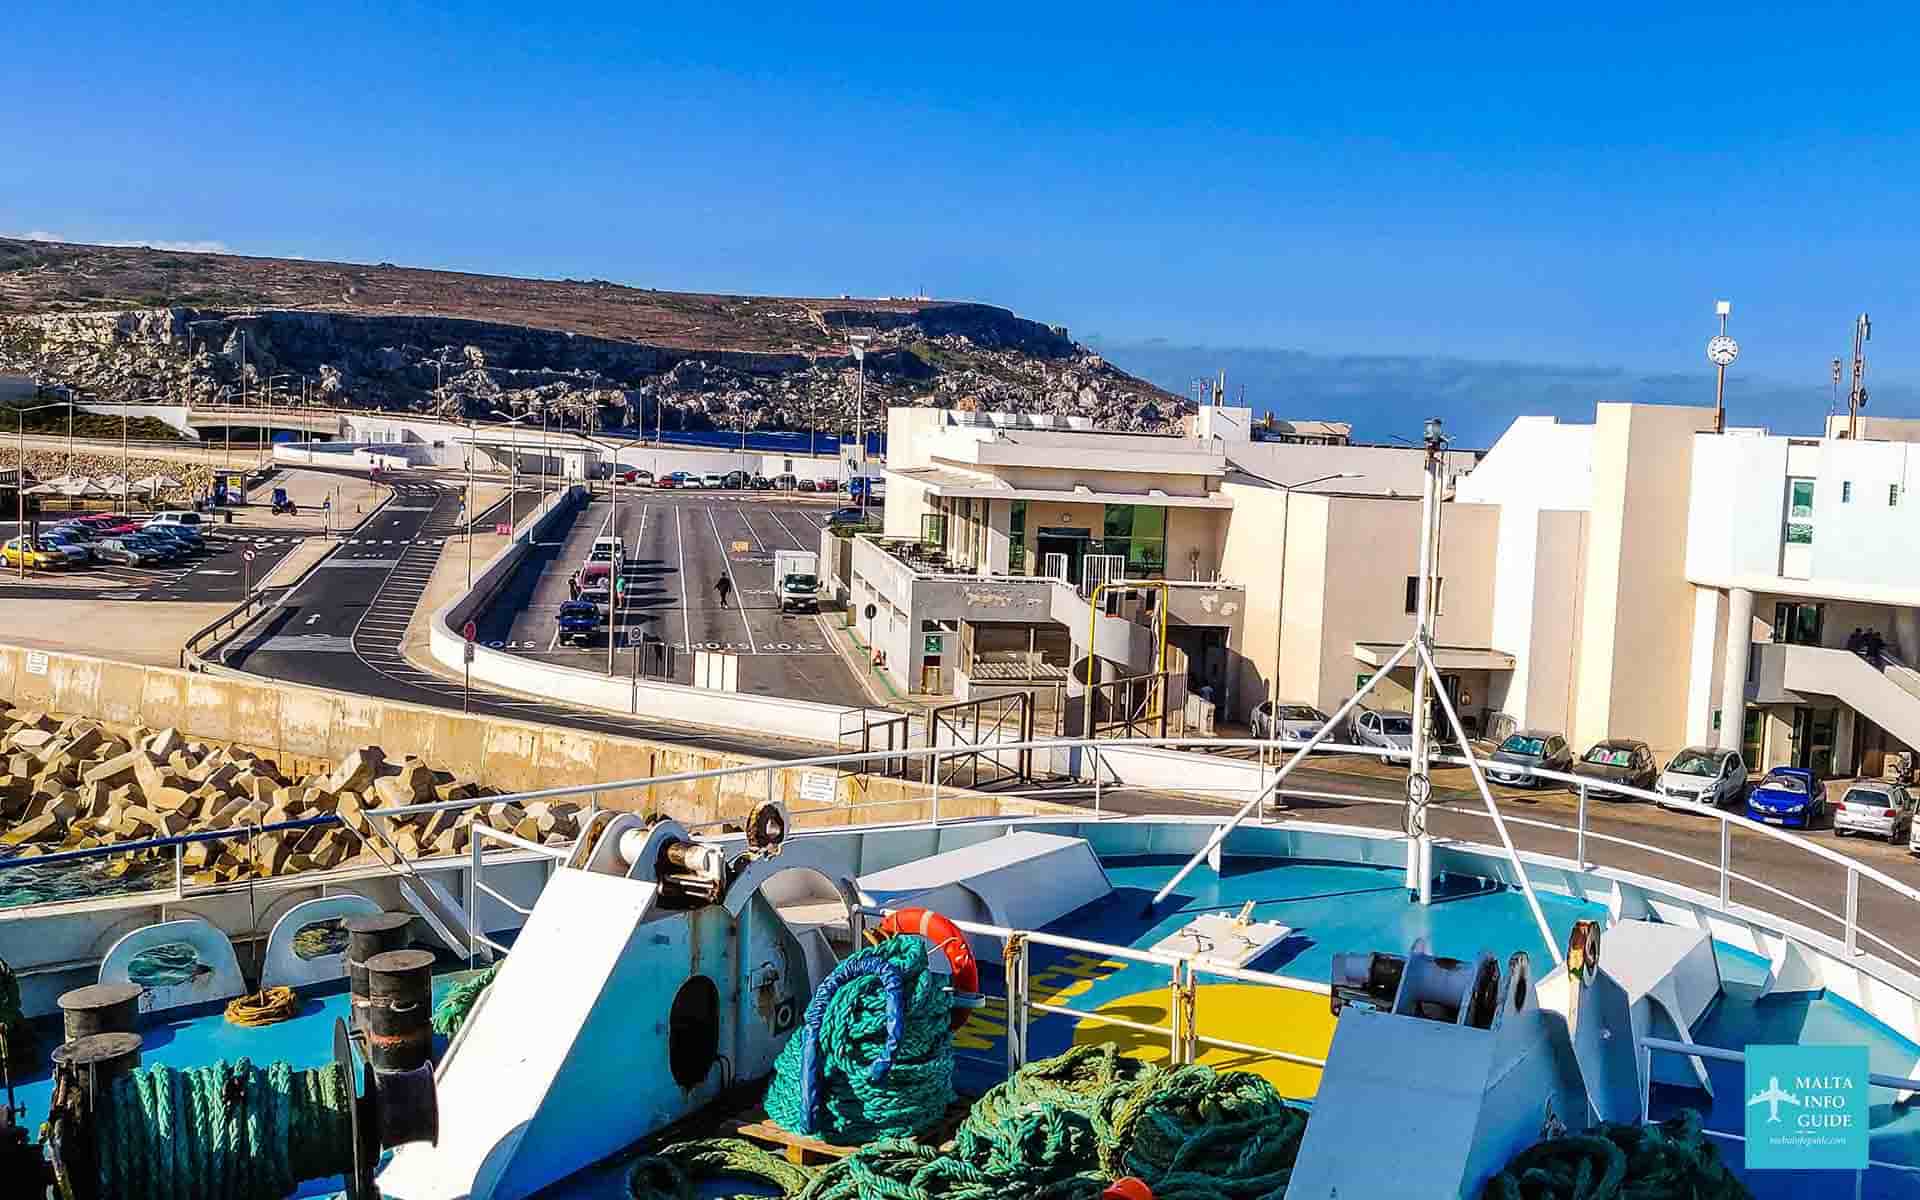 A view of the Cirkewwa terminal onboard the Gozo ferry.